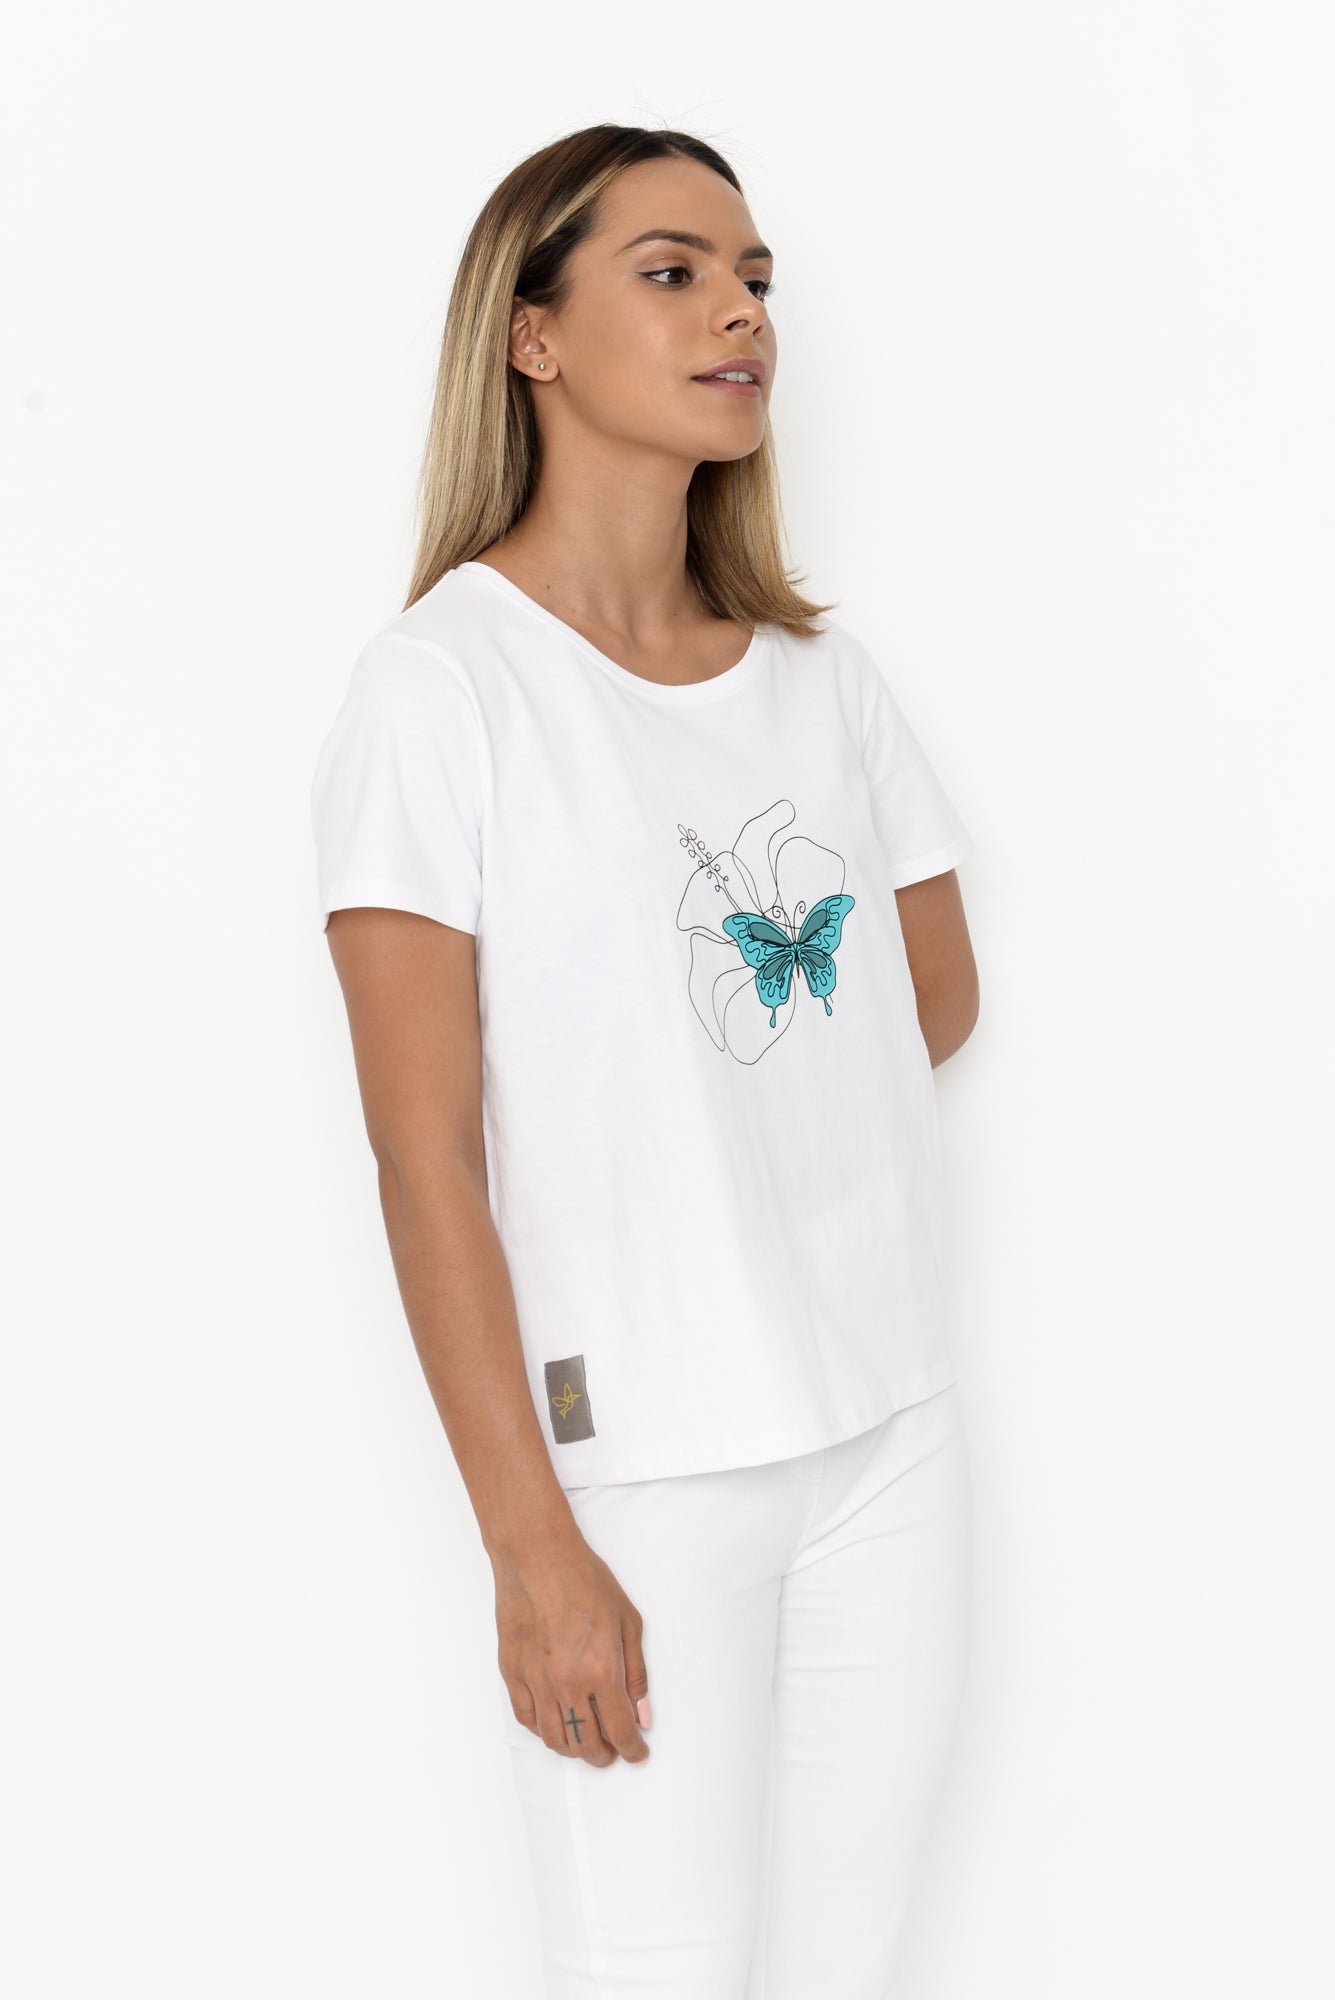 Women's Cube Tee - Blue Butterfly & Hibiscus